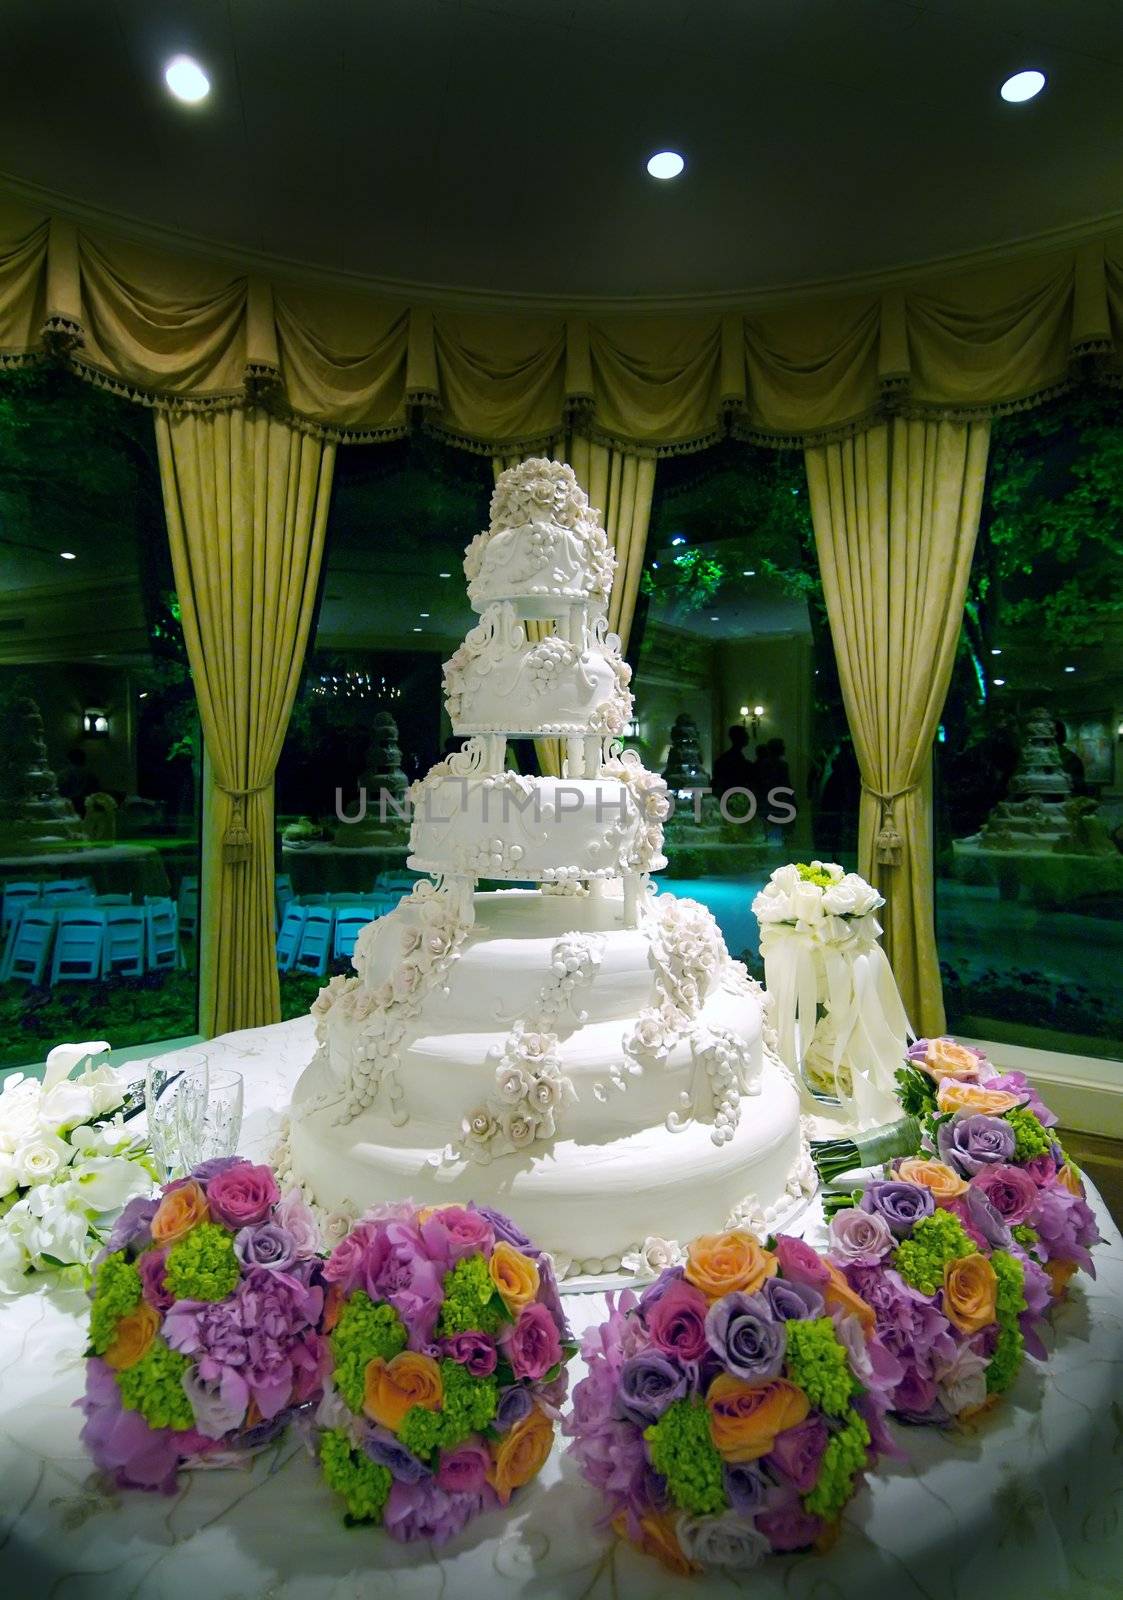 Image of an elaborate floral wedding cake